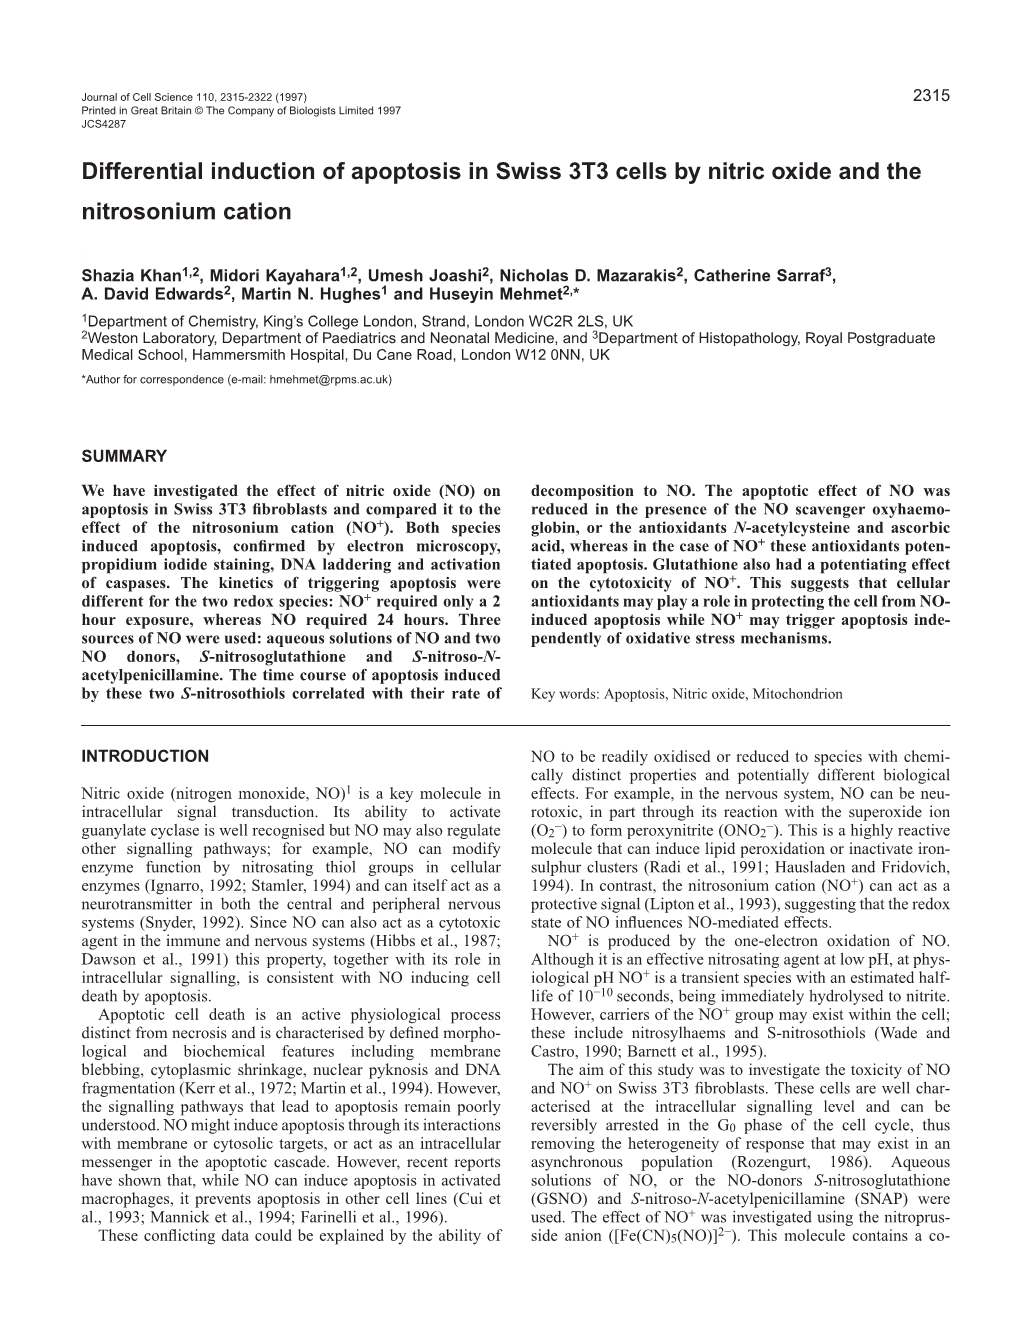 Differential Induction of Apoptosis in Swiss 3T3 Cells by Nitric Oxide and the Nitrosonium Cation